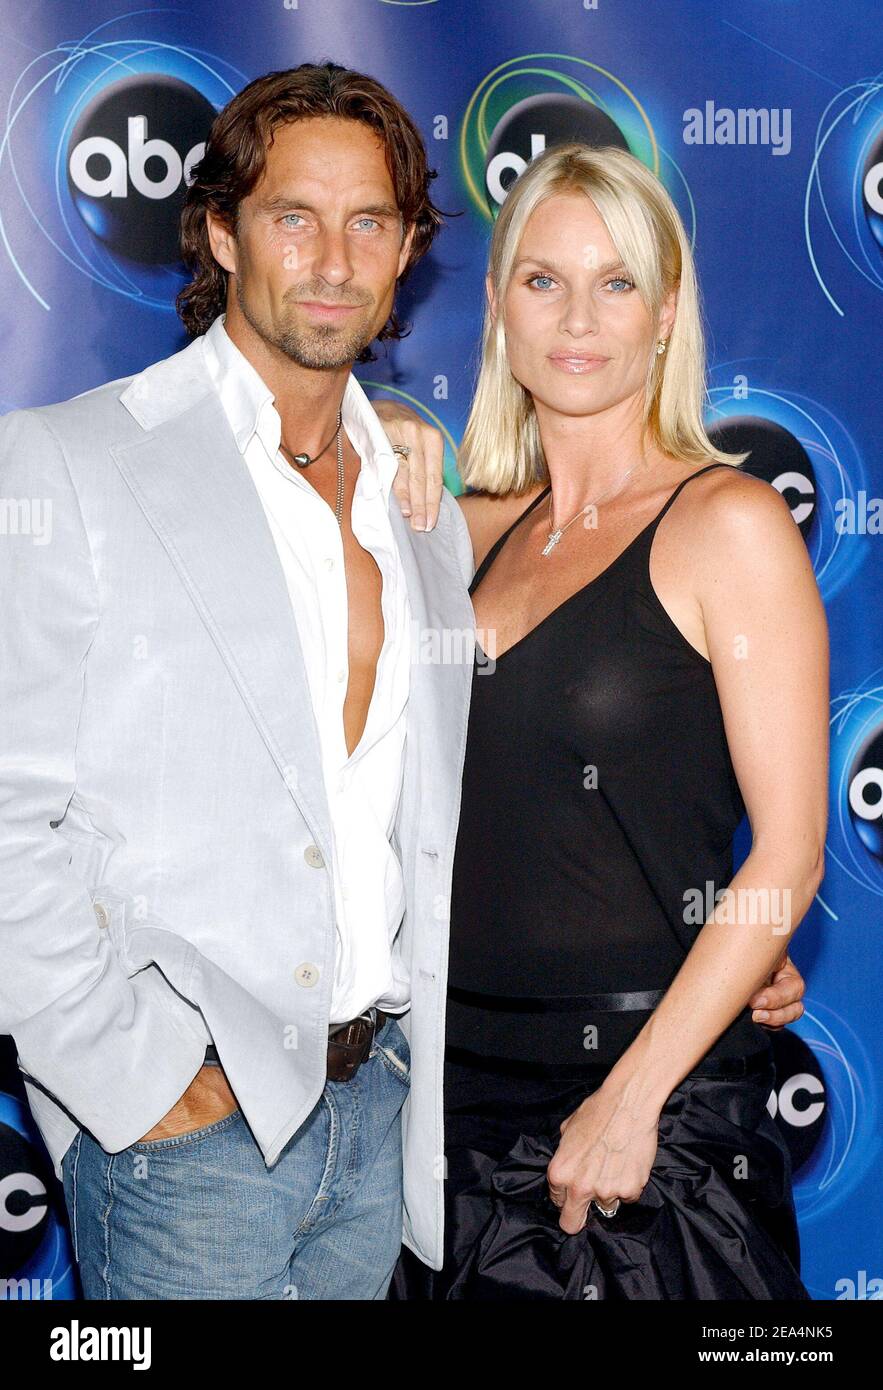 British-born actress and 'Desperate Wives' star Nicolette Sheridan and her boyfriend Niklas Soderblom attend the ABC Television 2005 Summer Press Tour All-Star Party held at The Abby Club in West Hollywood, Los Angeles, CA, USA, on July 27, 2005. Photo by Lionel Hahn/ABACAPRESS.COM. Stock Photo